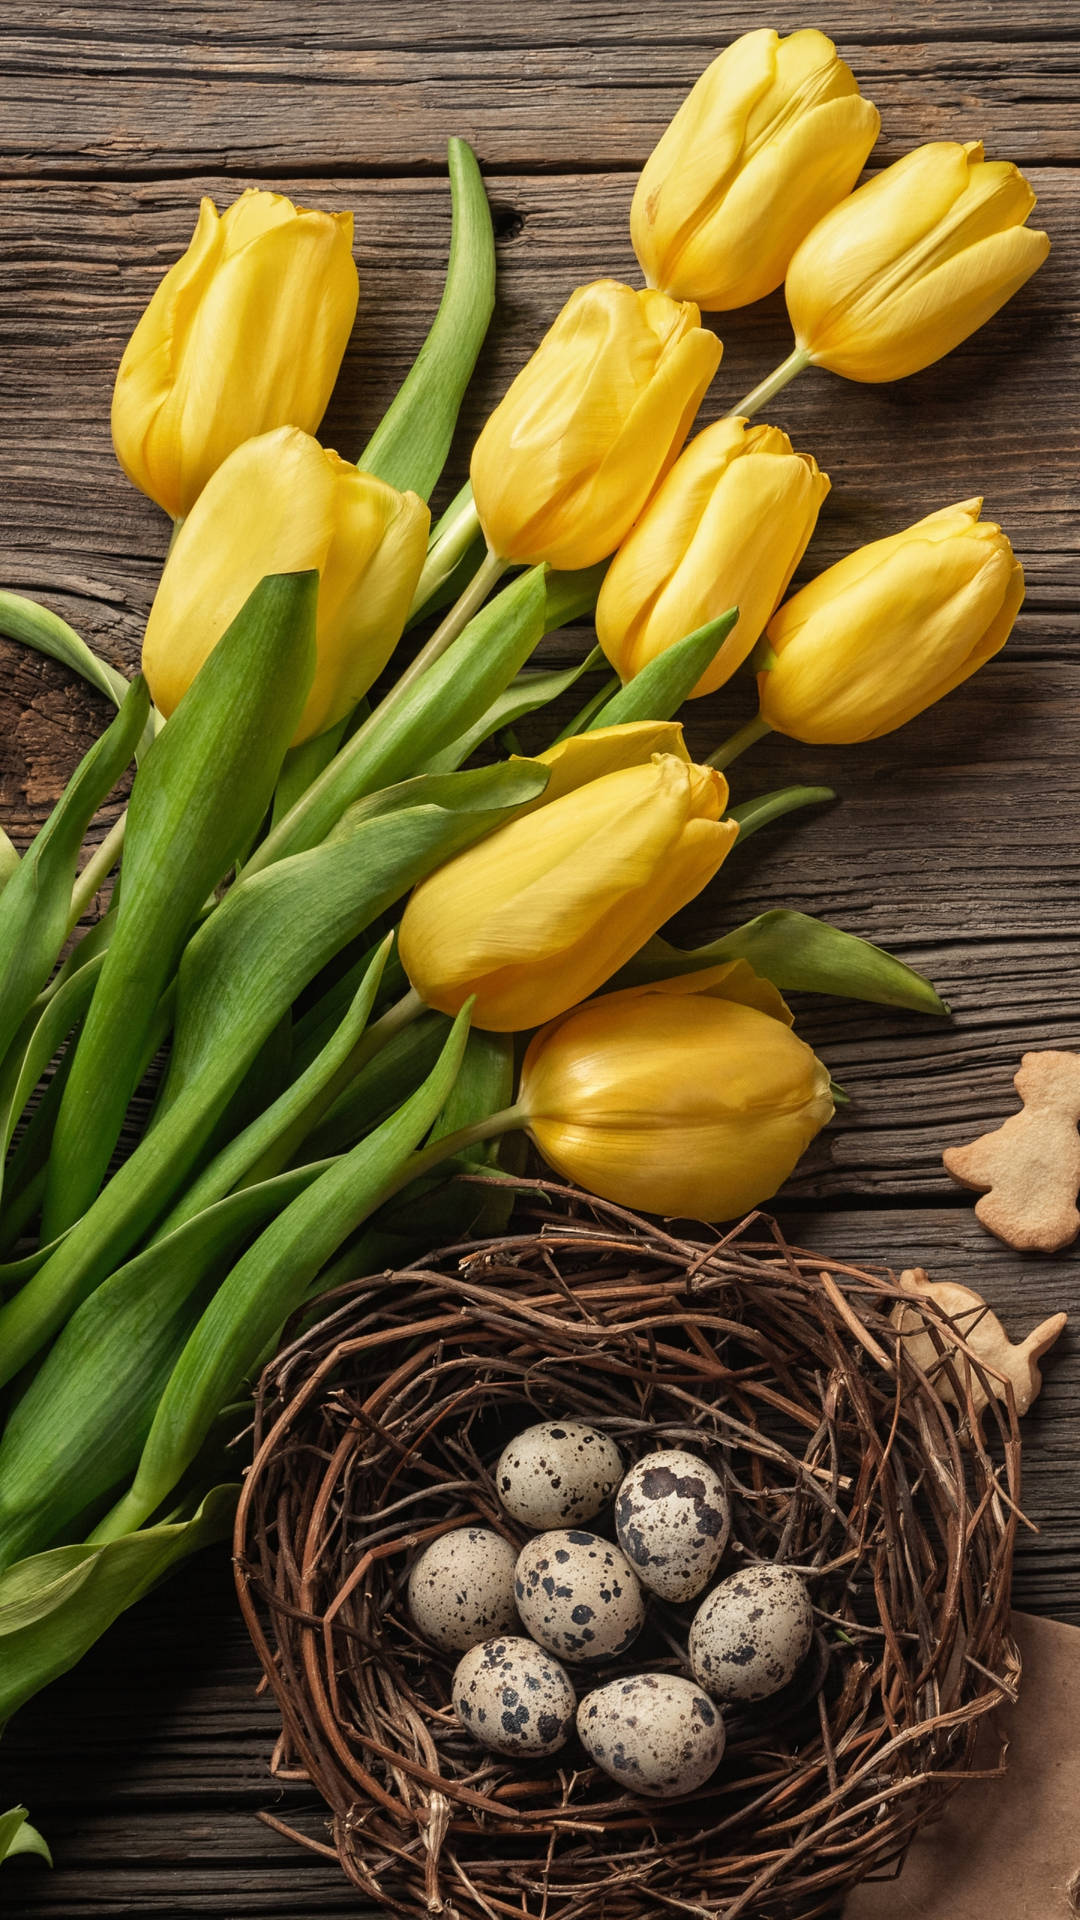 A Nest With Eggs And Tulips Wallpaper